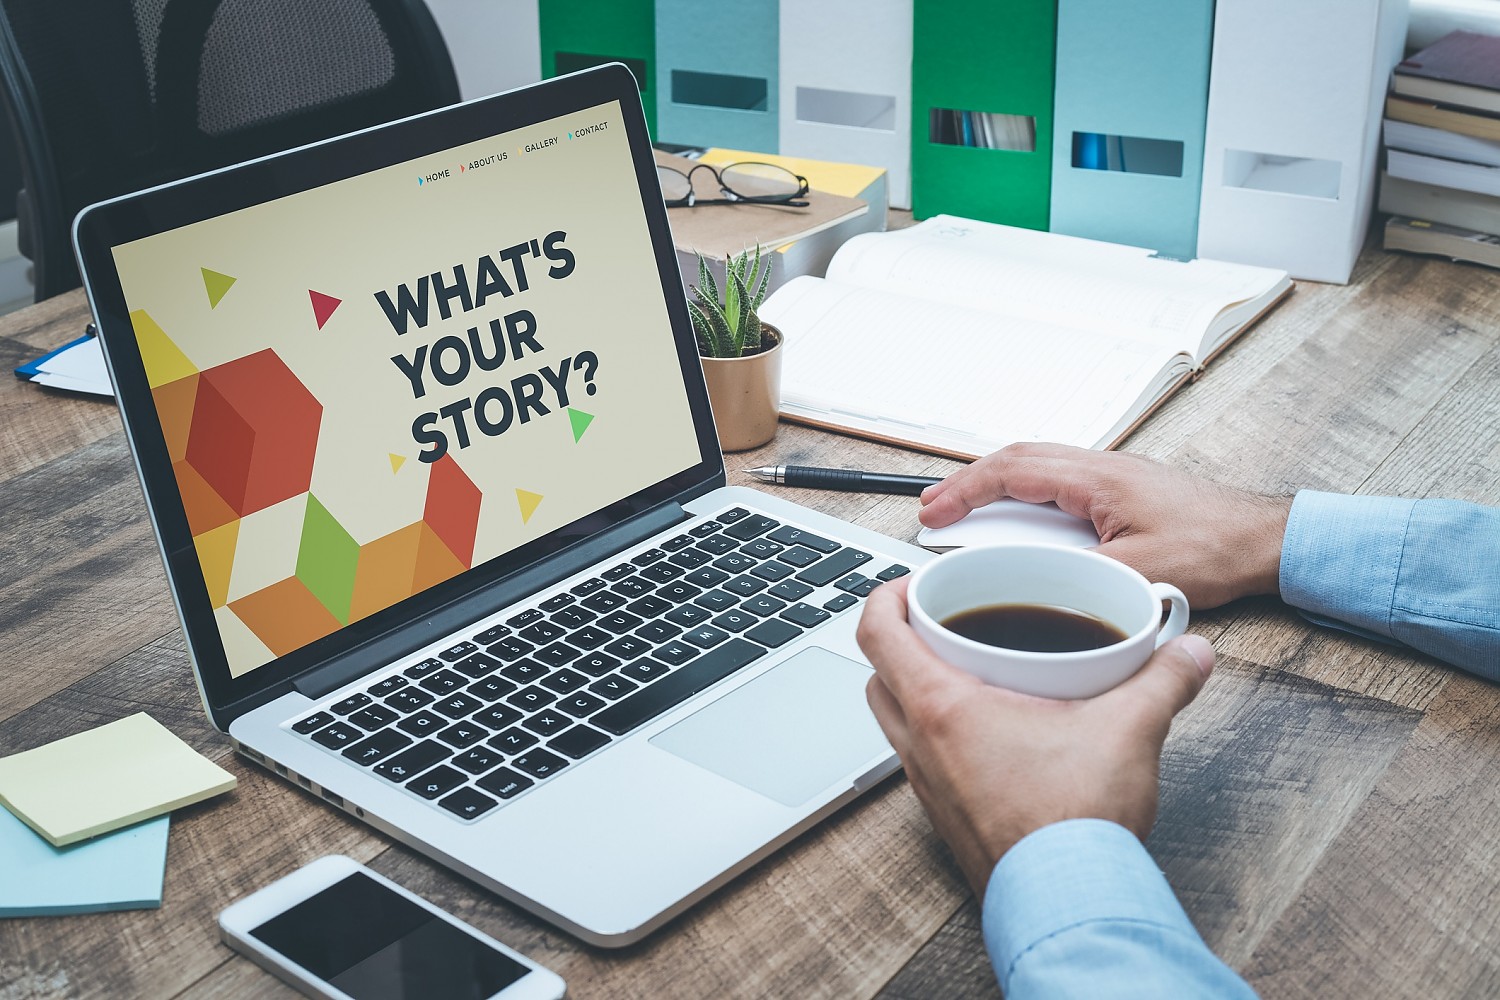 Does your website tell your story?